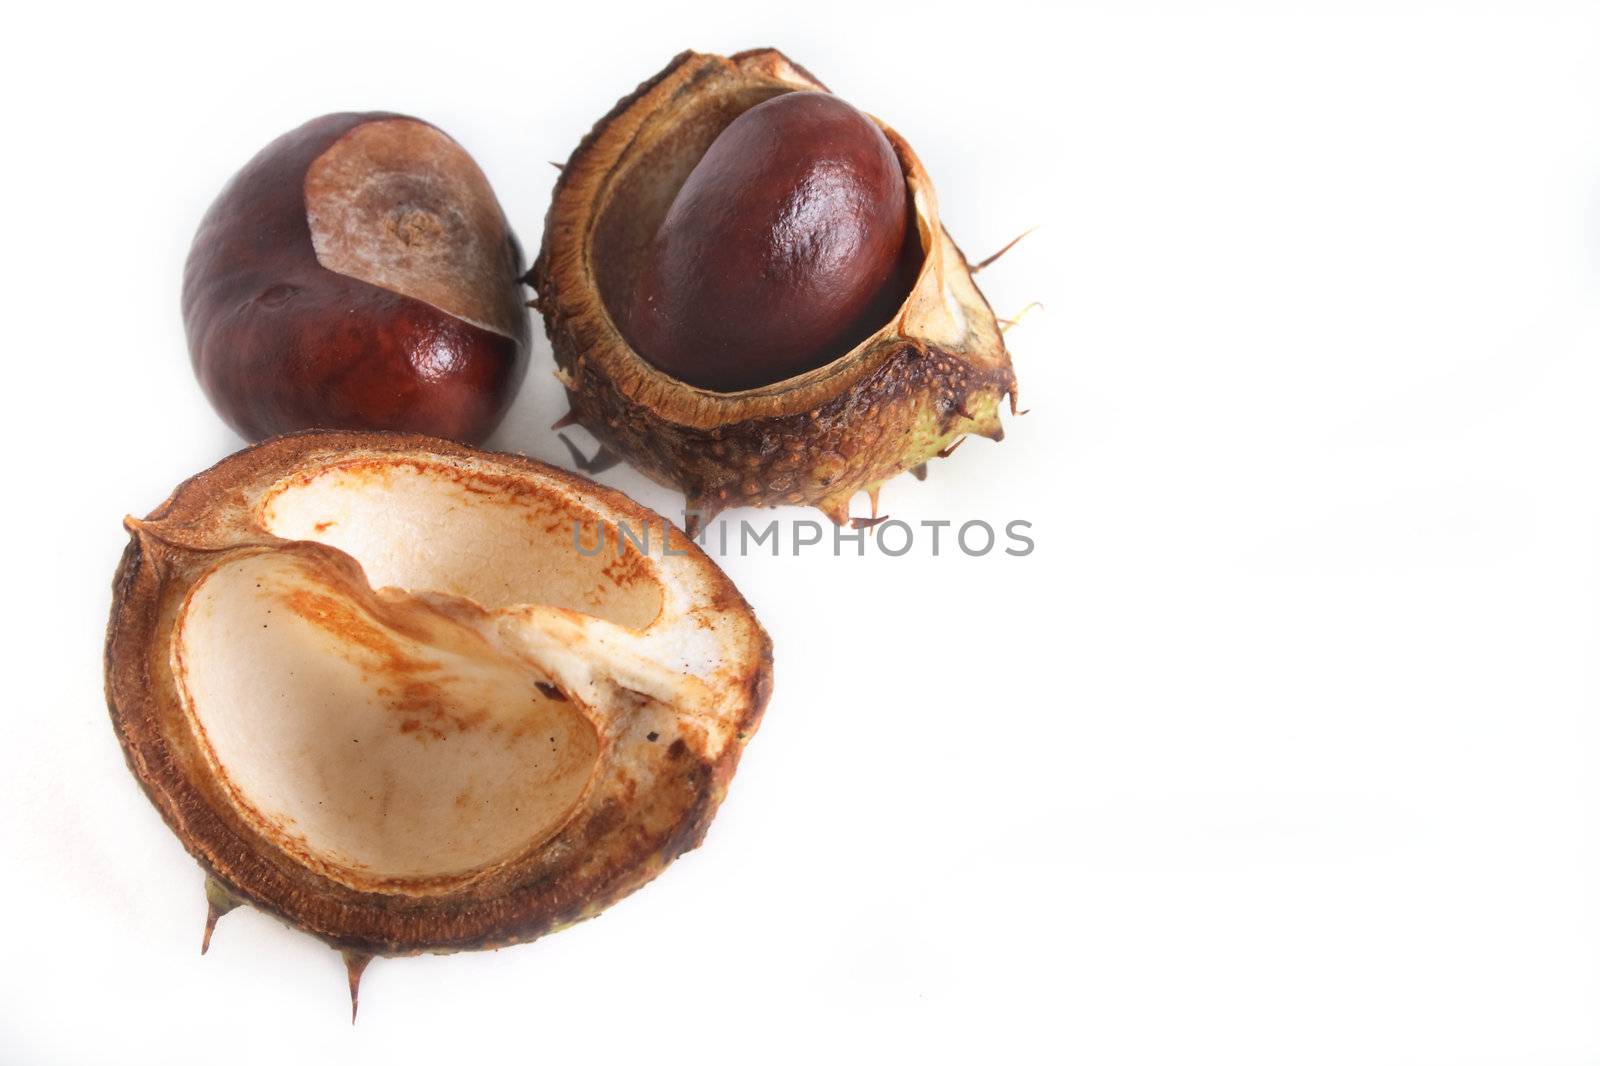 conkers and there shells over a light background